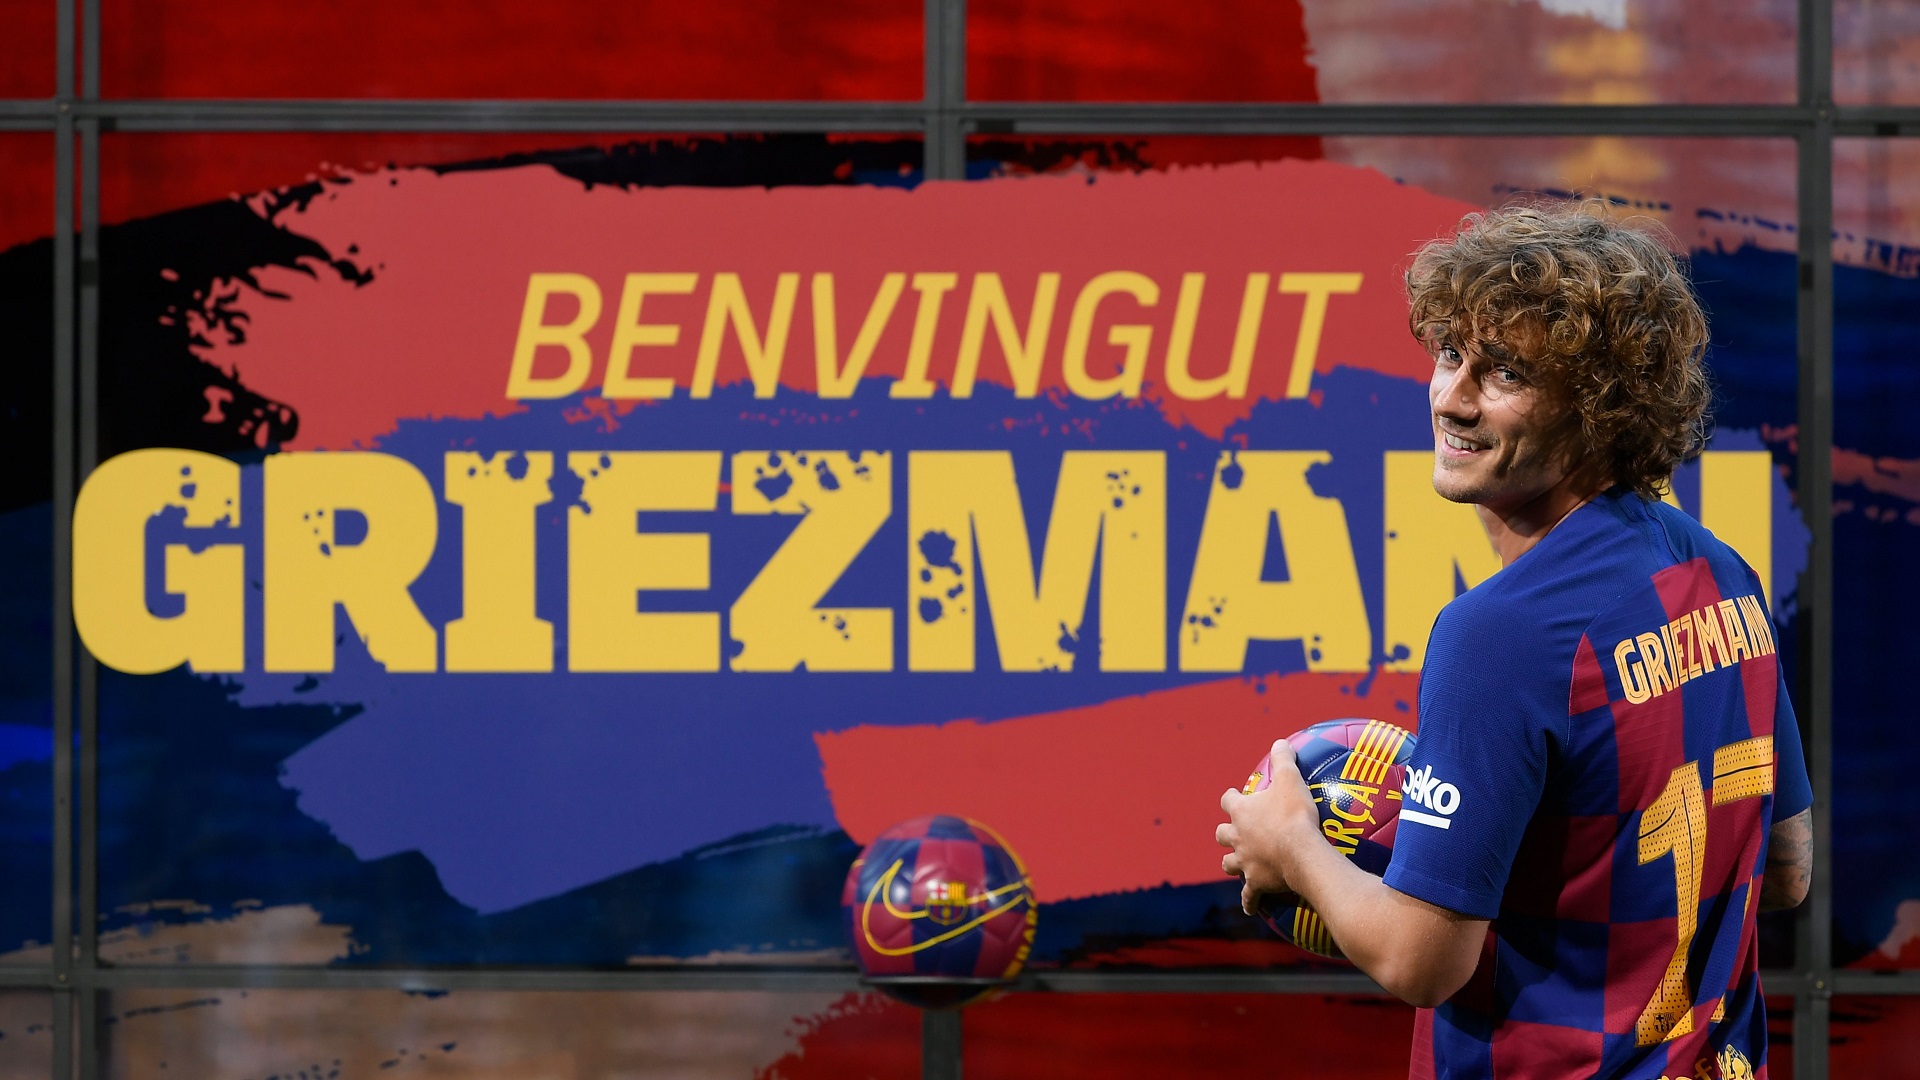 Griezmann handed No. 17 ahead of debut season with Barcelona